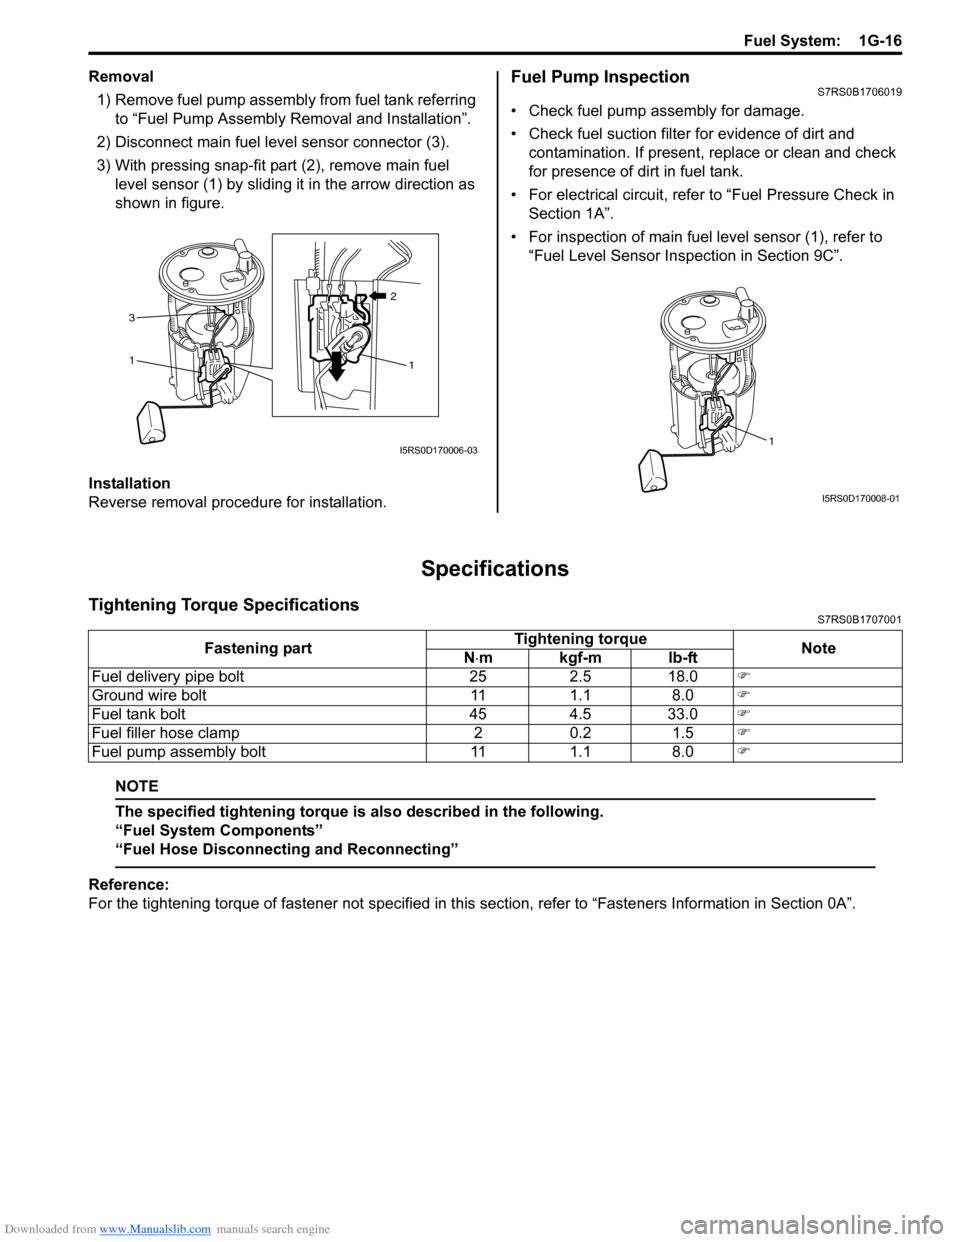 SUZUKI SWIFT 2004 2.G Service User Guide Downloaded from www.Manualslib.com manuals search engine Fuel System:  1G-16
Removal1) Remove fuel pump assembly from fuel tank referring  to “Fuel Pump Assembly Removal and Installation”.
2) Disc